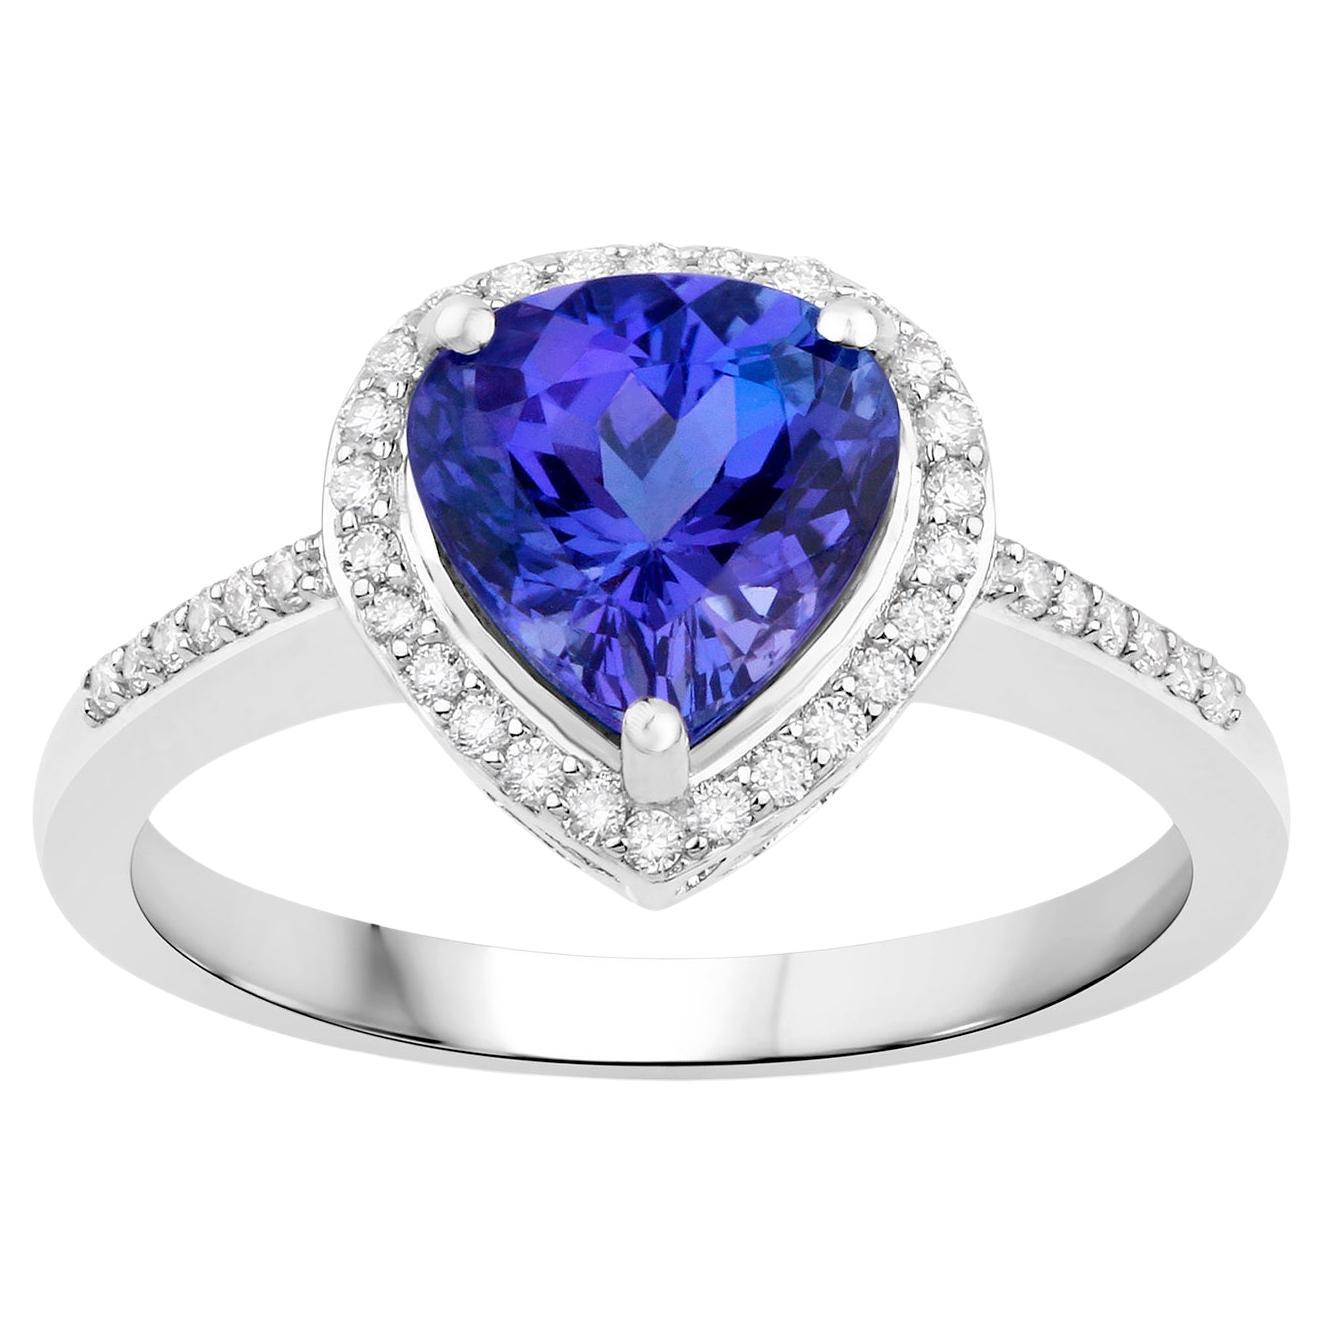 Tanzanite Ring With Diamonds 2.33 Carats 14K White Gold For Sale